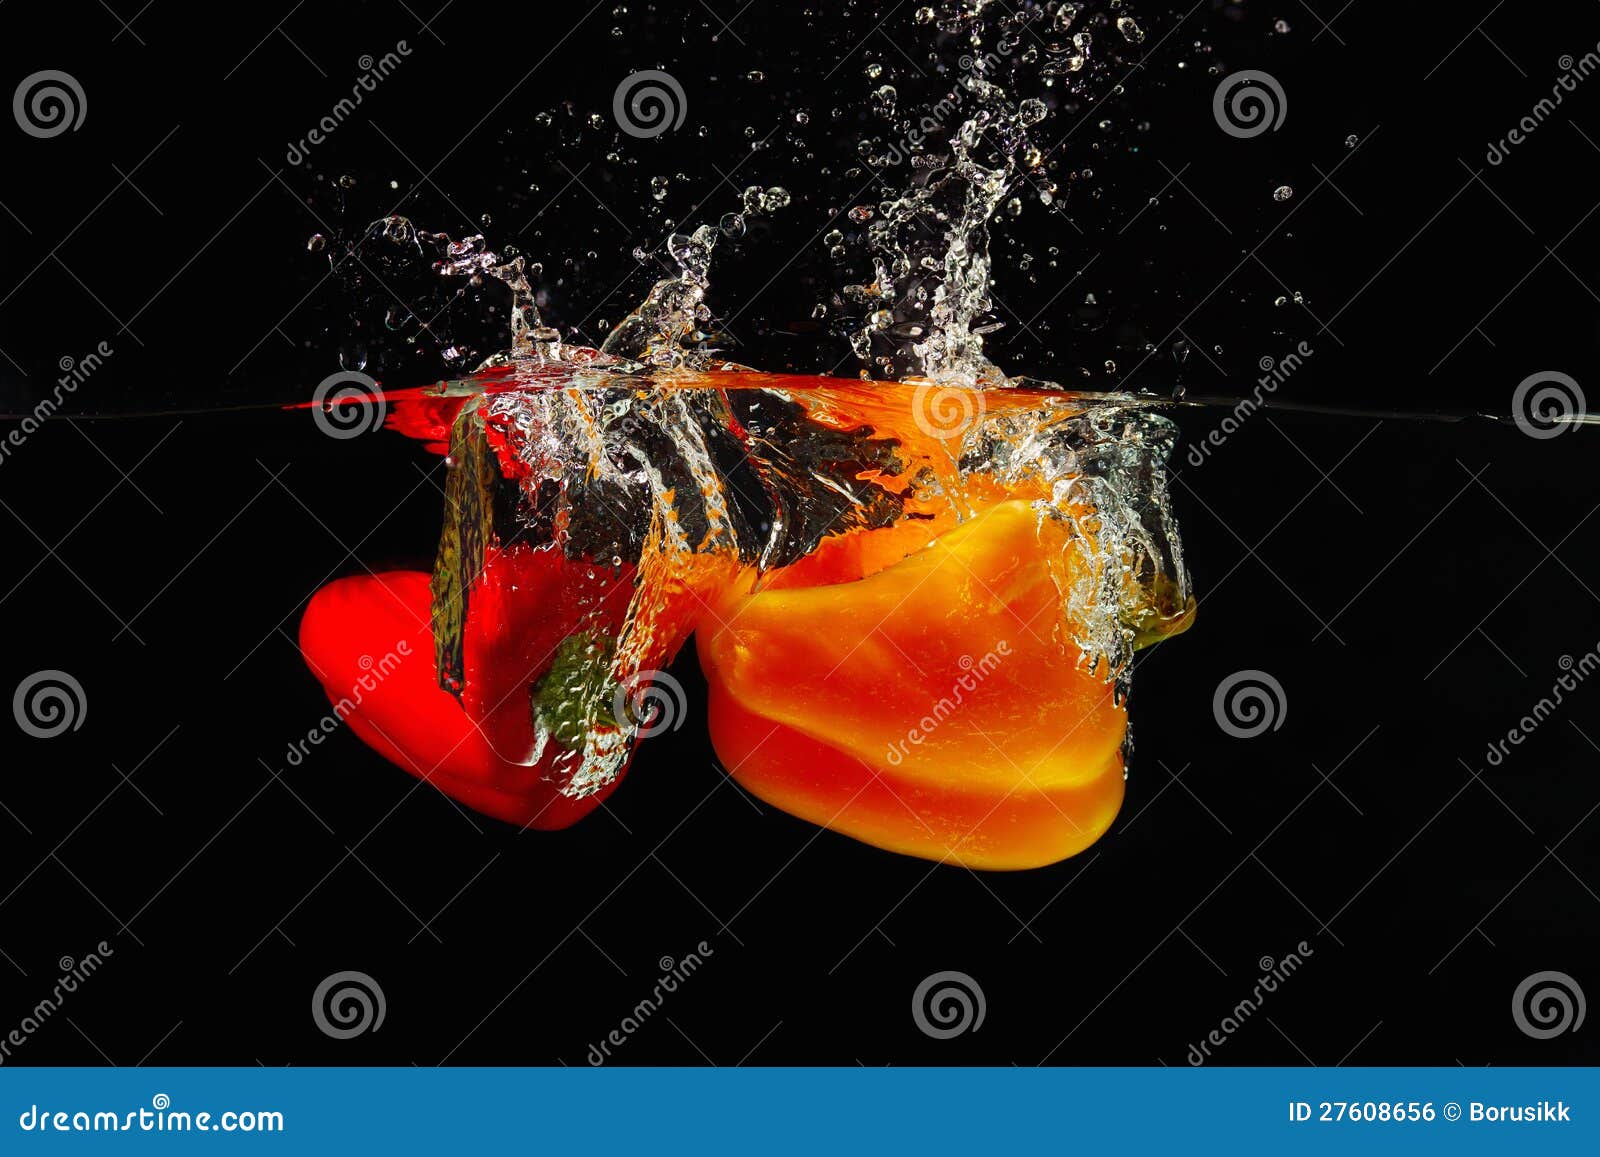 red and yellow bellpepper falling into the water